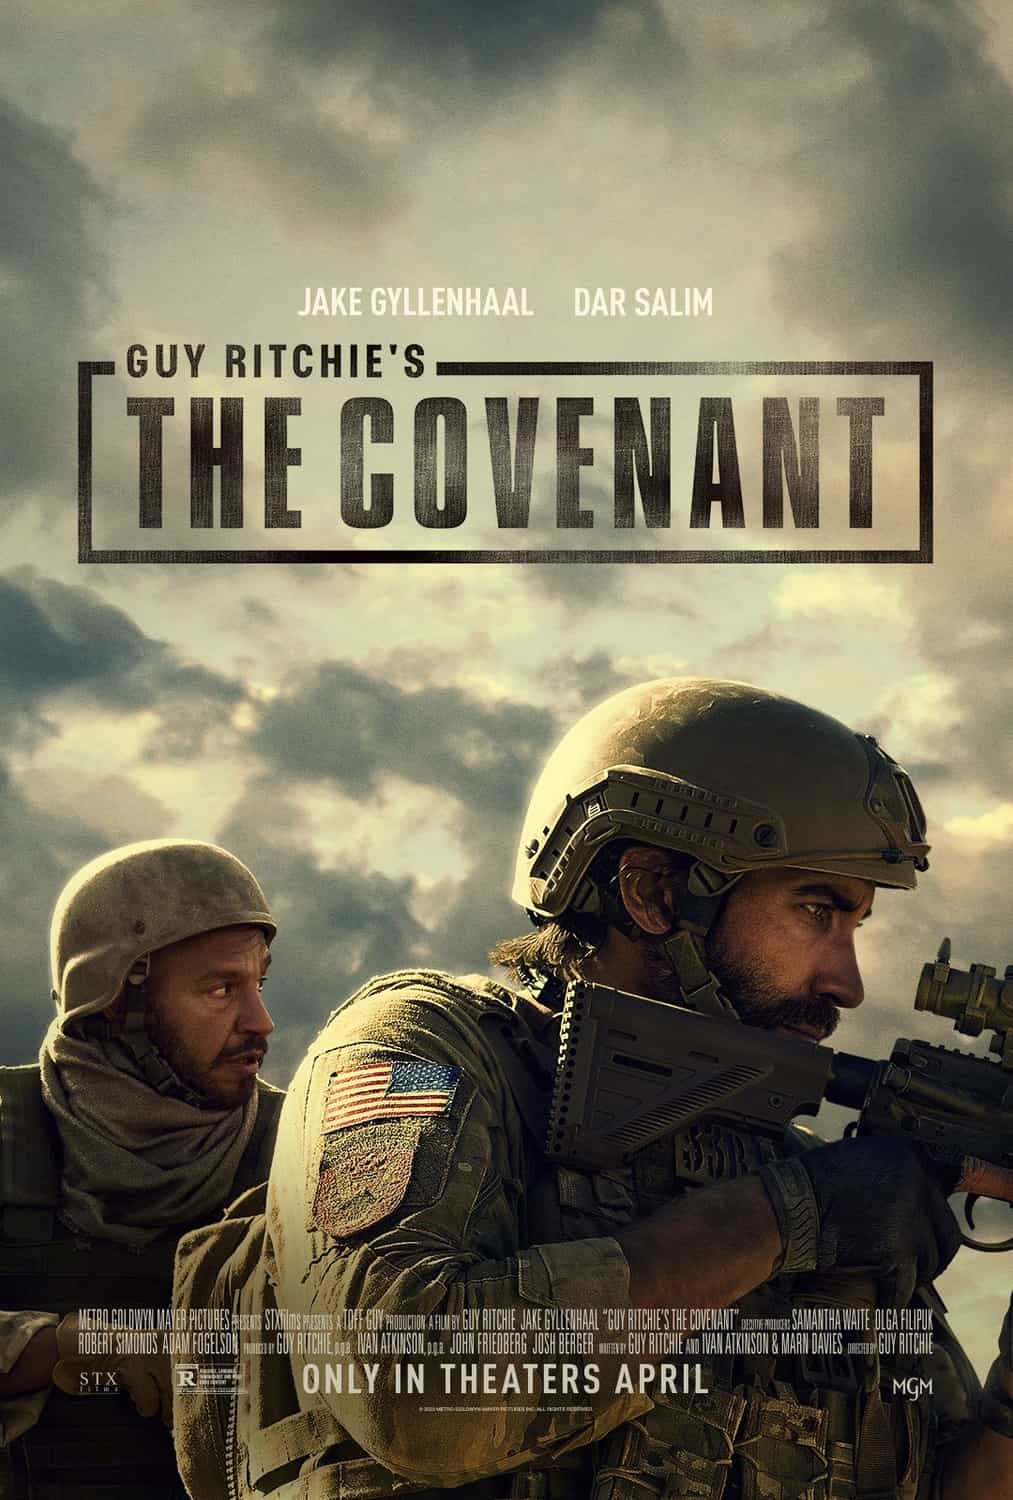 New poster has been released for The Covenant which stars Jake Gyllenhaal and Emily Beecham #thecovenant